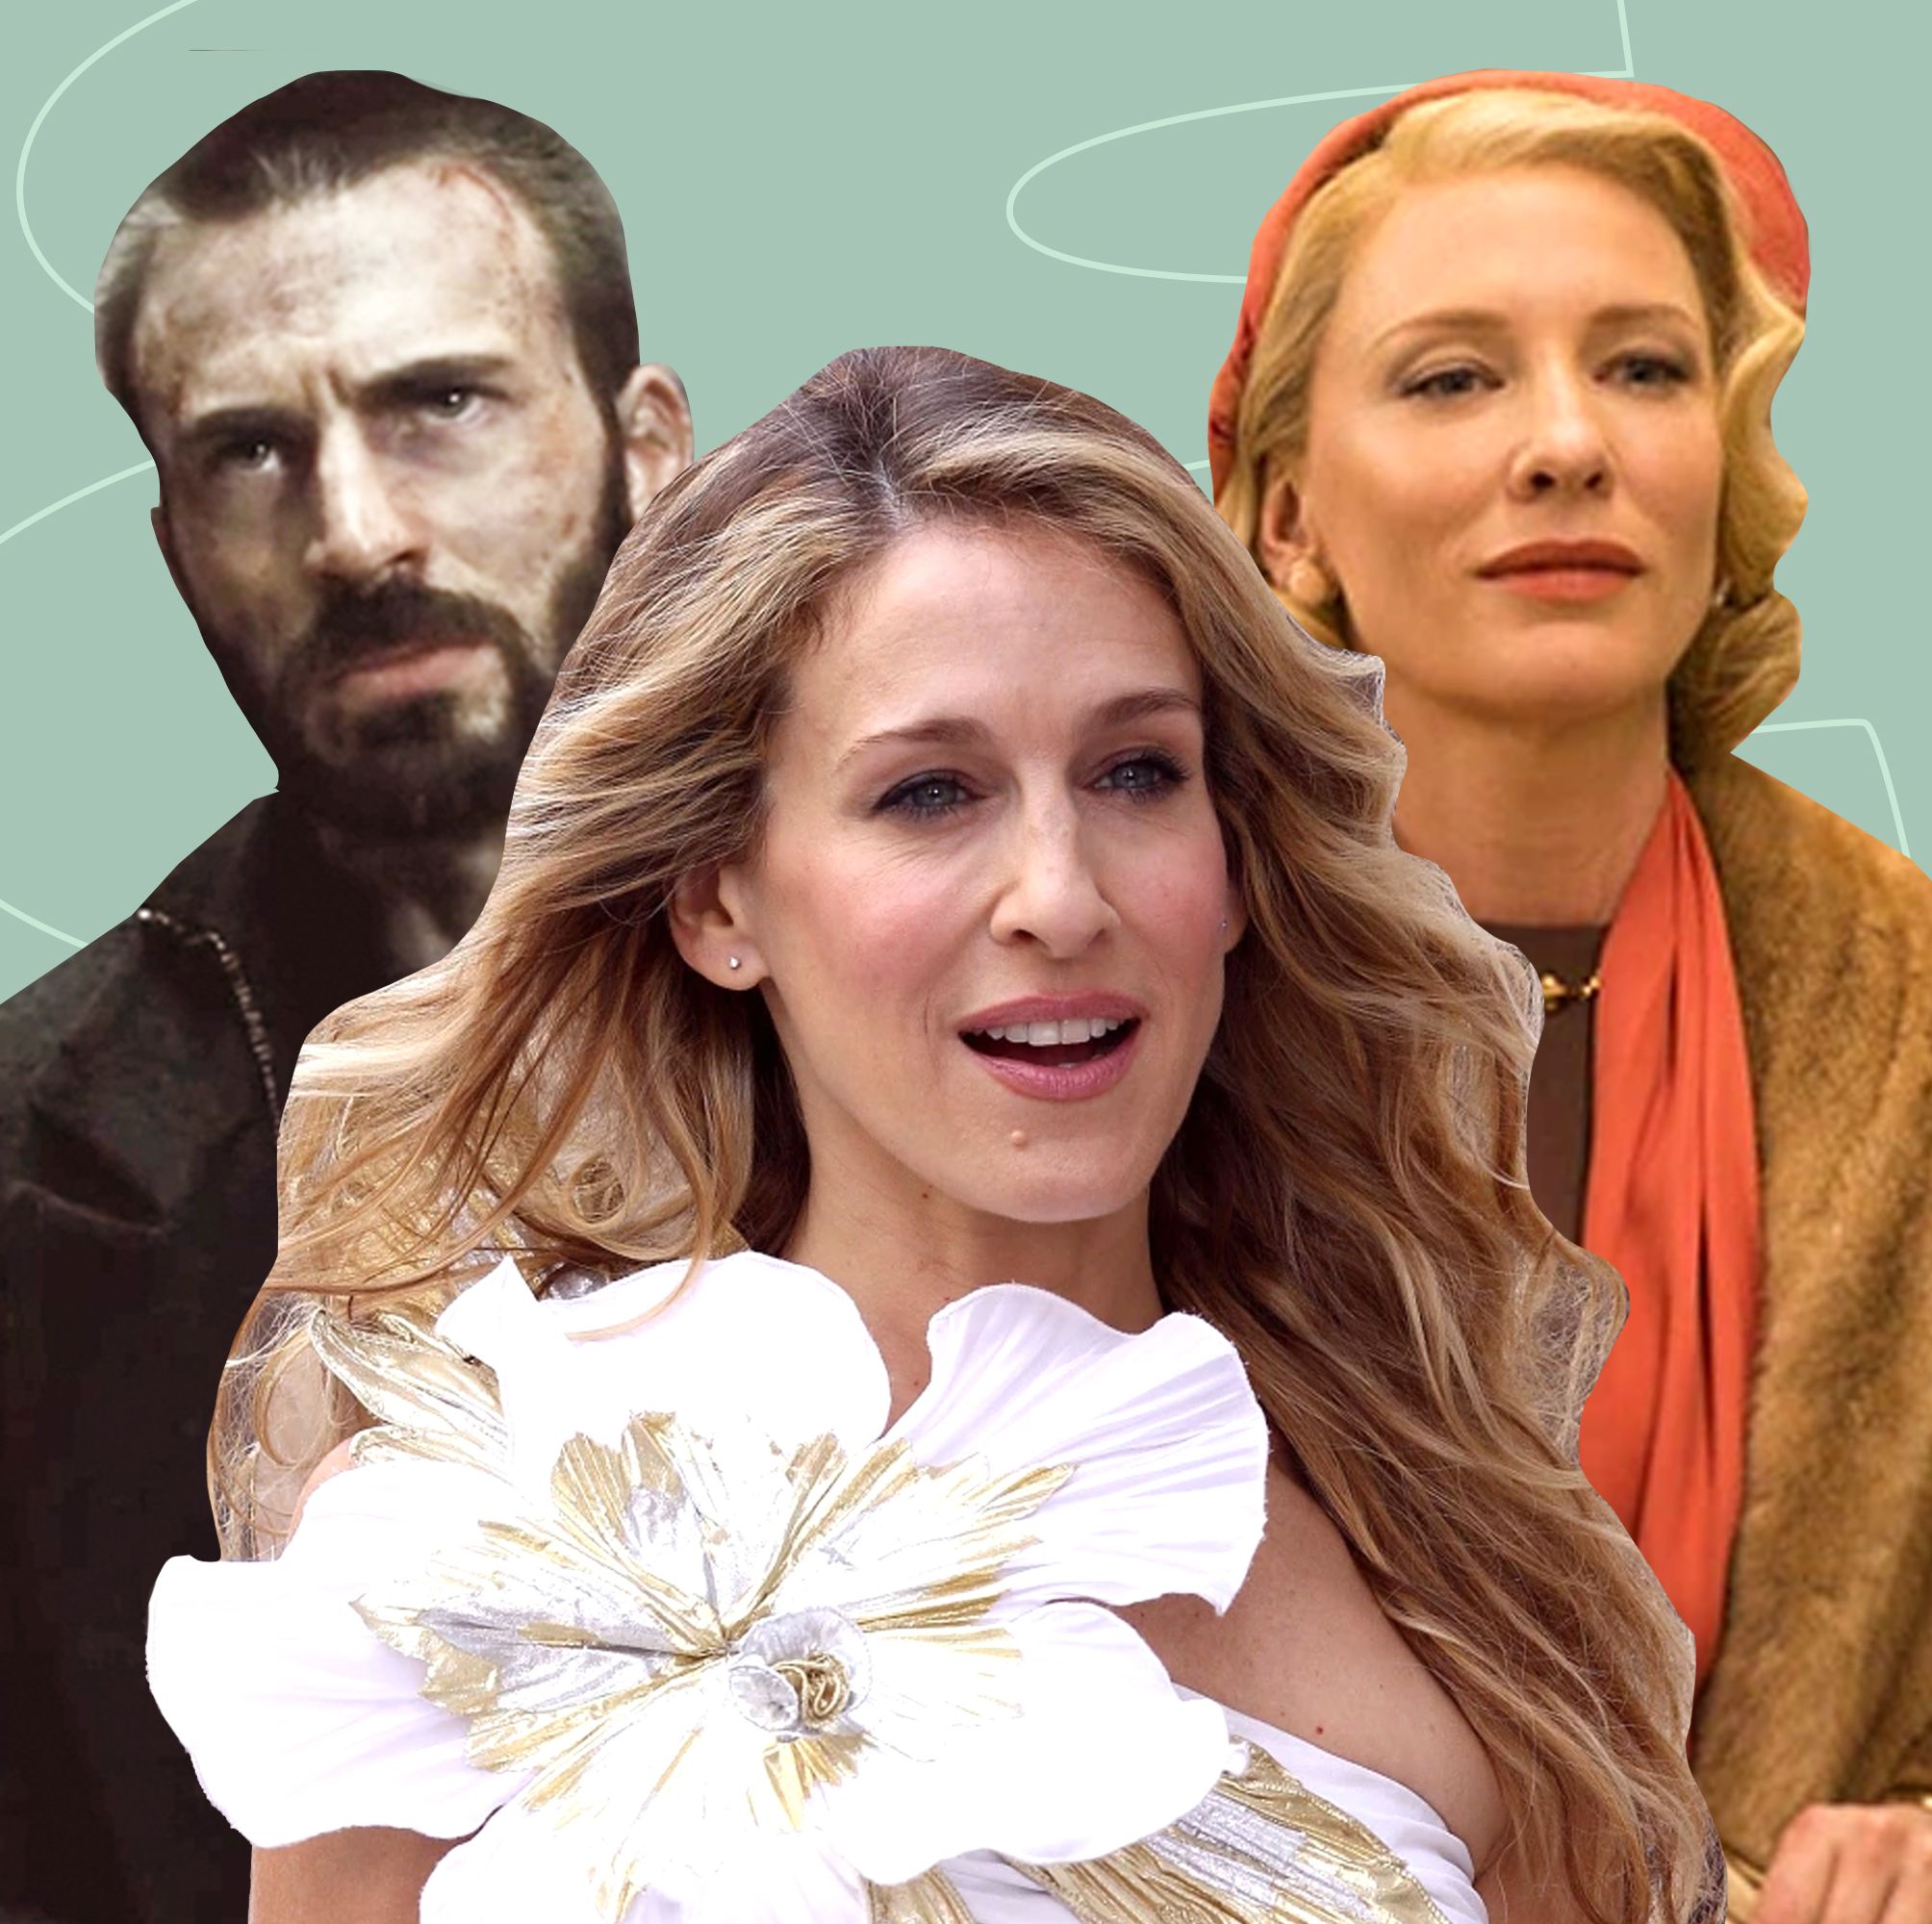 The Best Movies for New Year's Scratch That Aspirational Itch